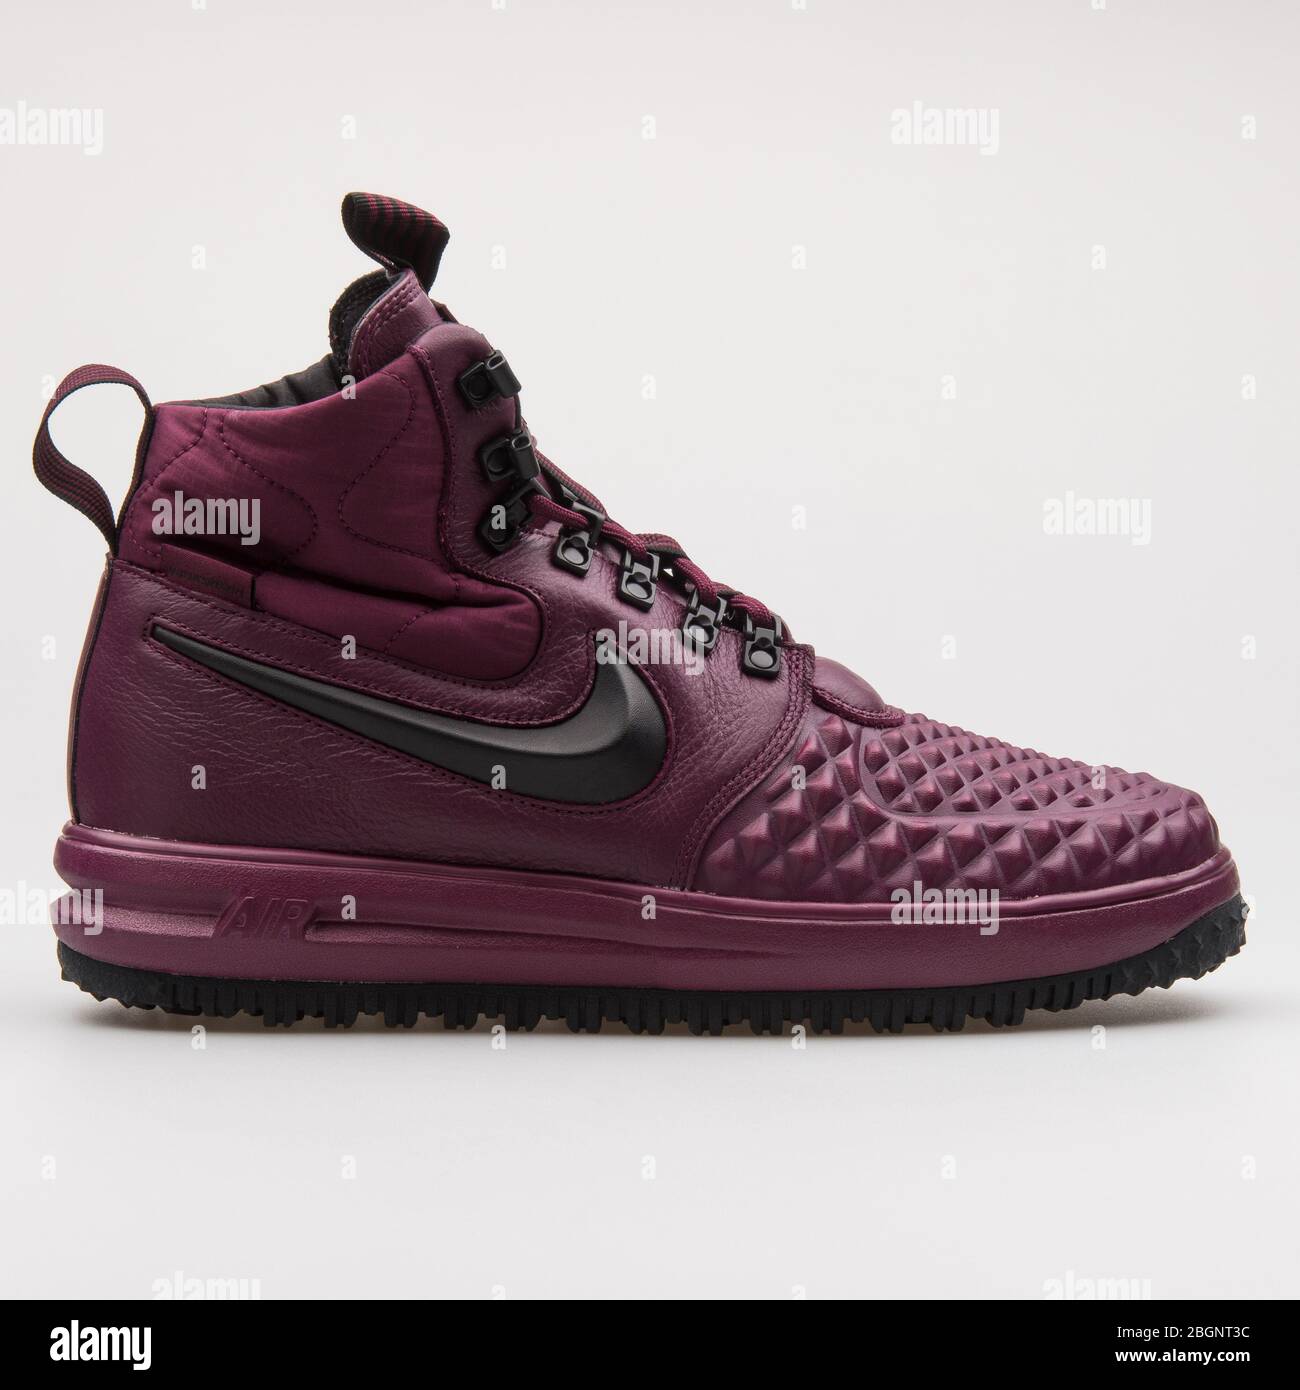 VIENNA, AUSTRIA - AUGUST 24, 2017: Nike Lunar Force 1 Duckboot 17 bordeaux  and black sneaker on white background Stock Photo - Alamy